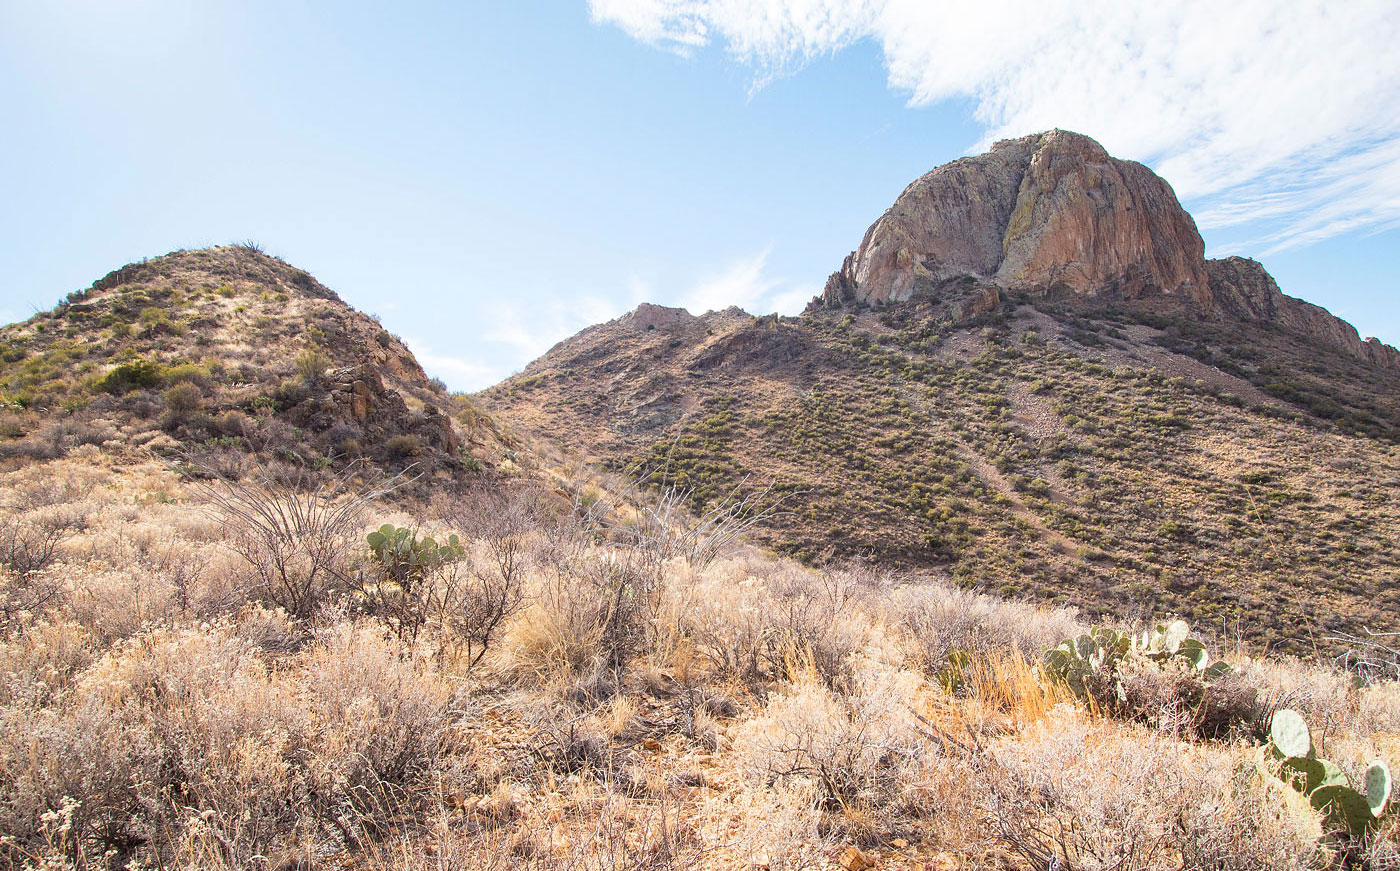 Hike Picacho Peak via Dodson Trail in Big Bend National Park, Texas - Stav is Lost